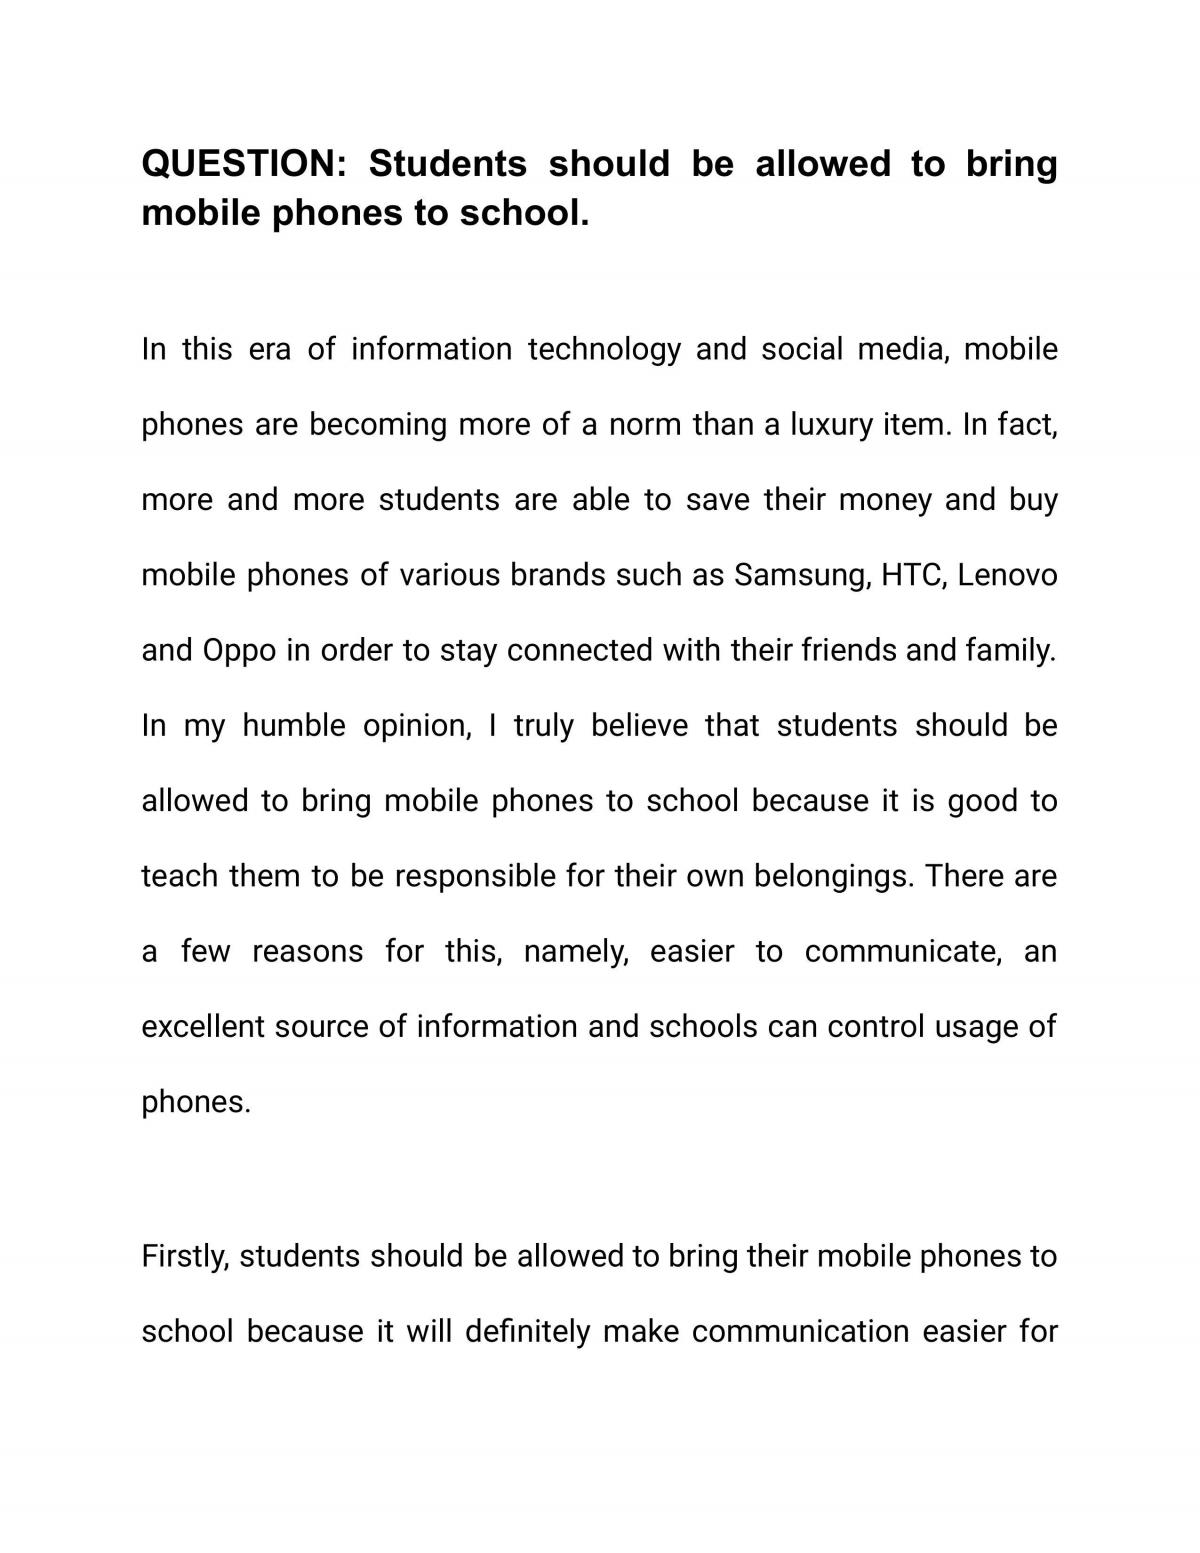 essay should mobile phones be allowed in school